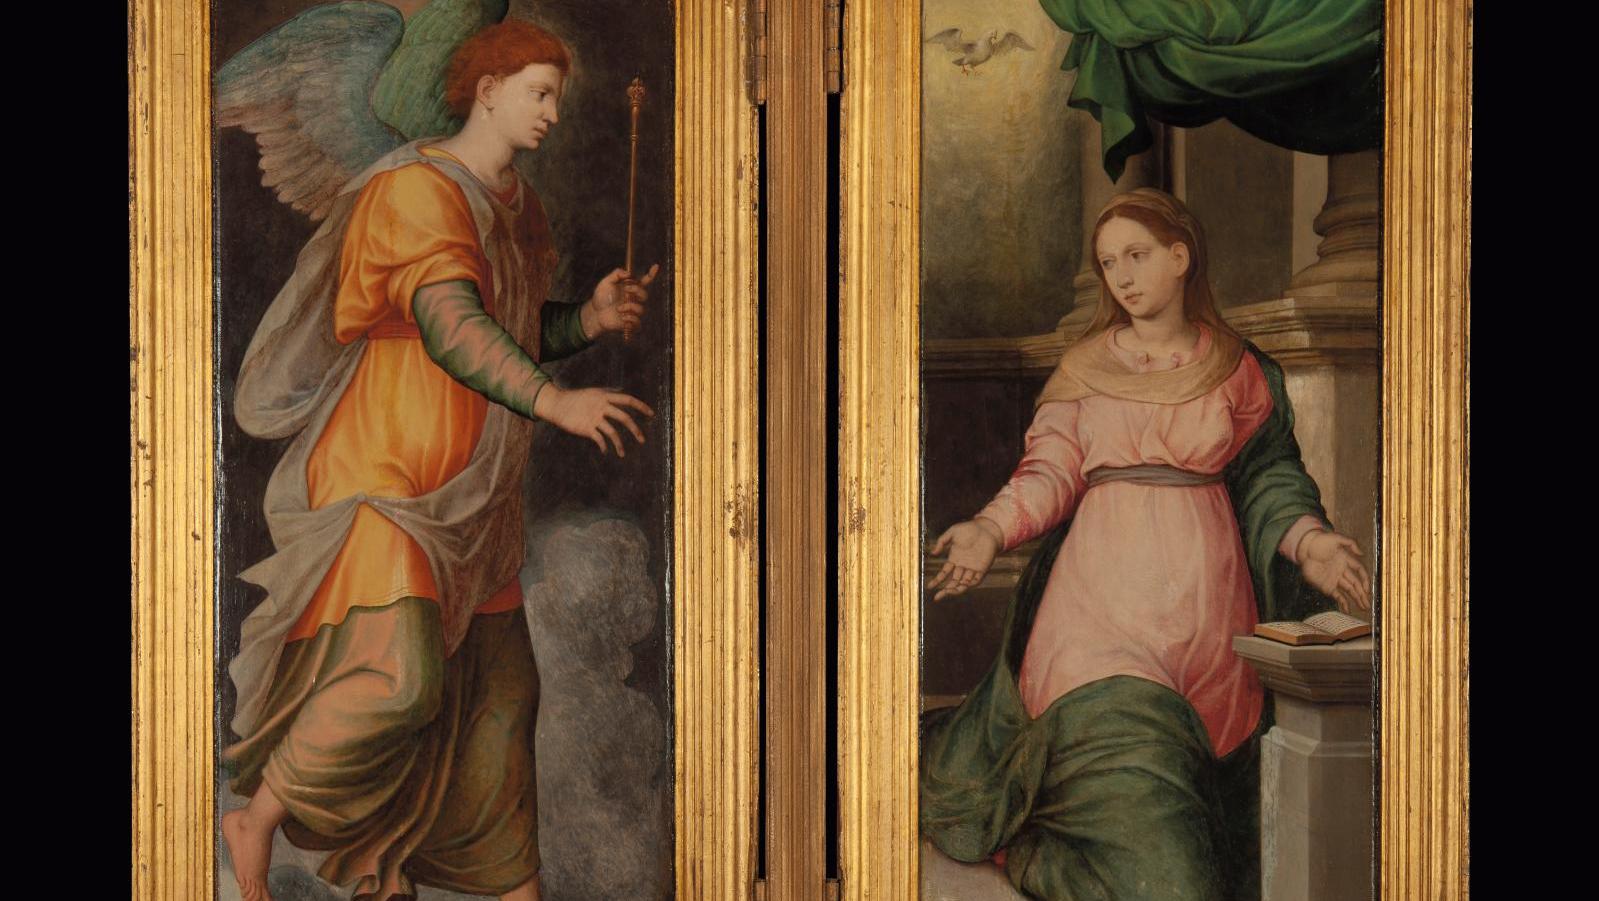 Giovanni Capassini (1510-1579), The Annunciation: Gabriel and the Virgin Mary, forming... Florentine Painter Giovanni Capassini Returns to the Auction Room